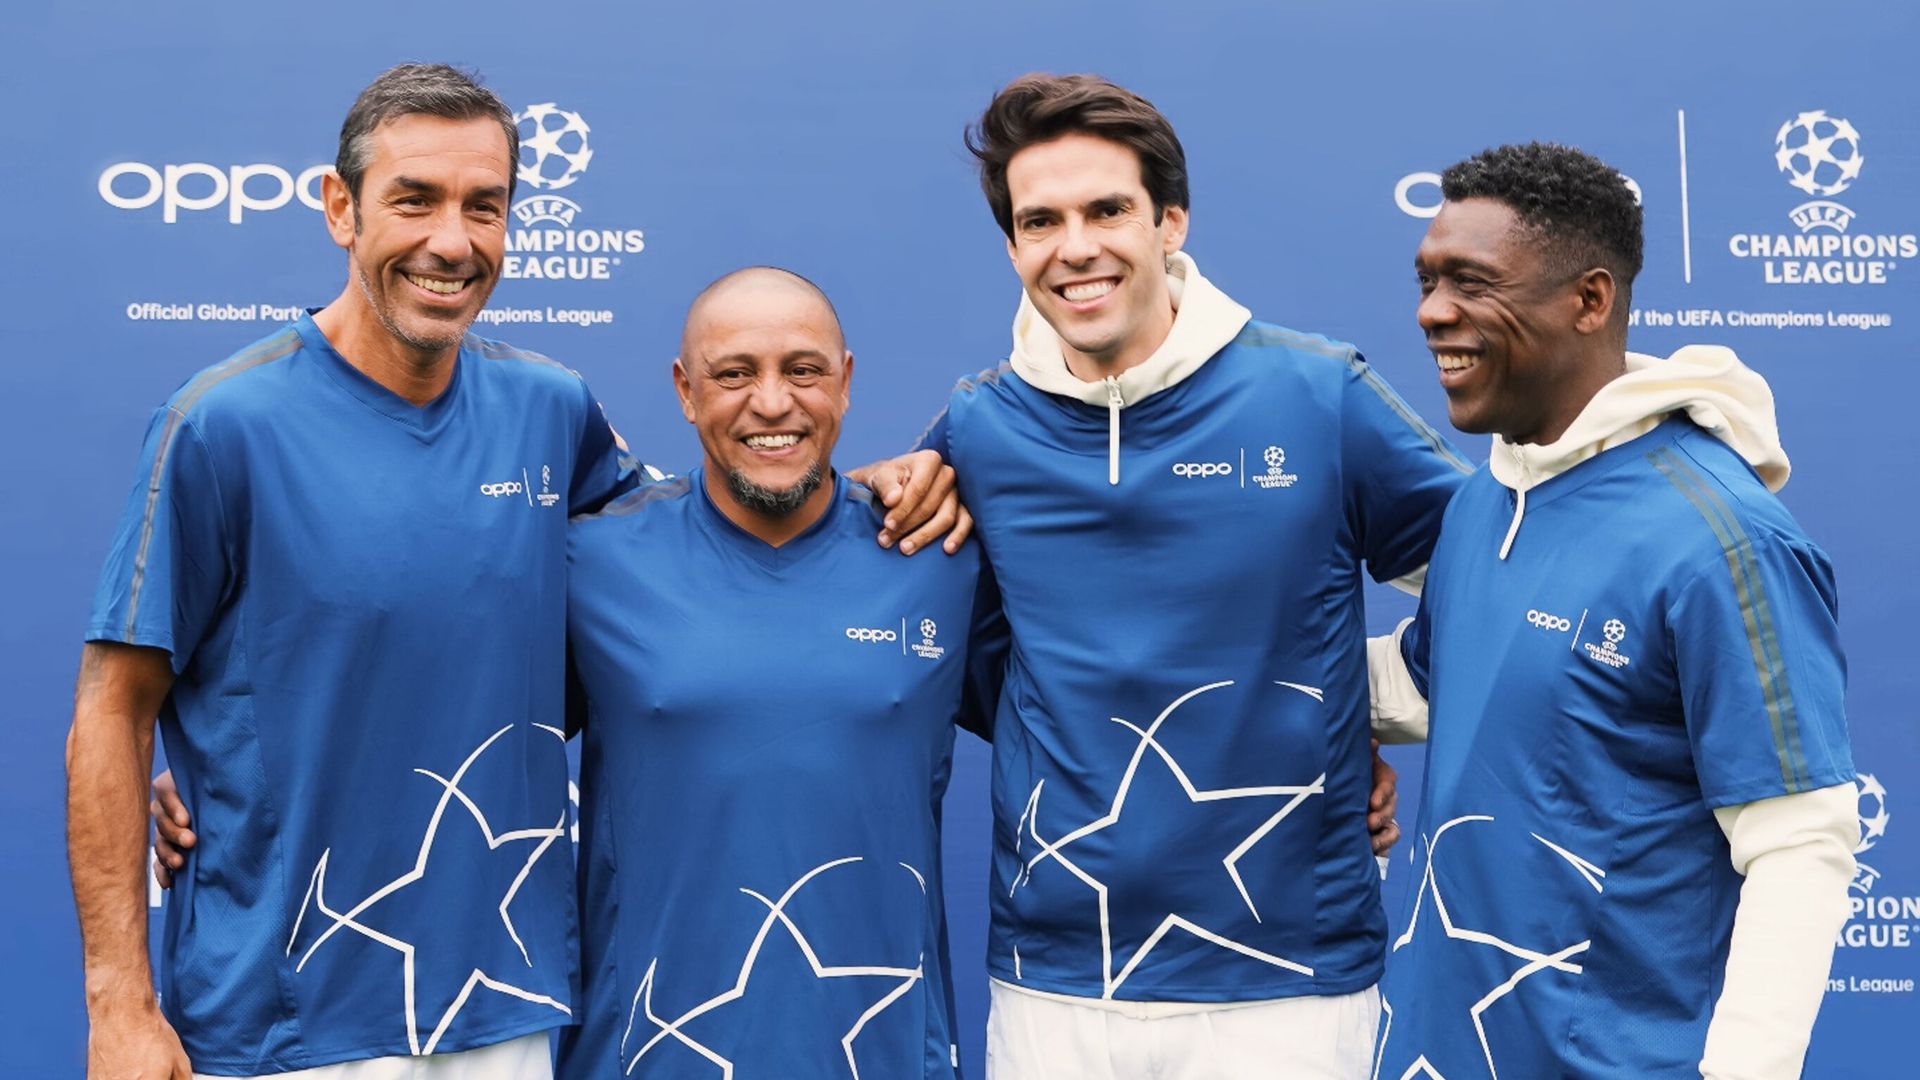 Kaka's world: OPPO brings together football legends and imaging technology